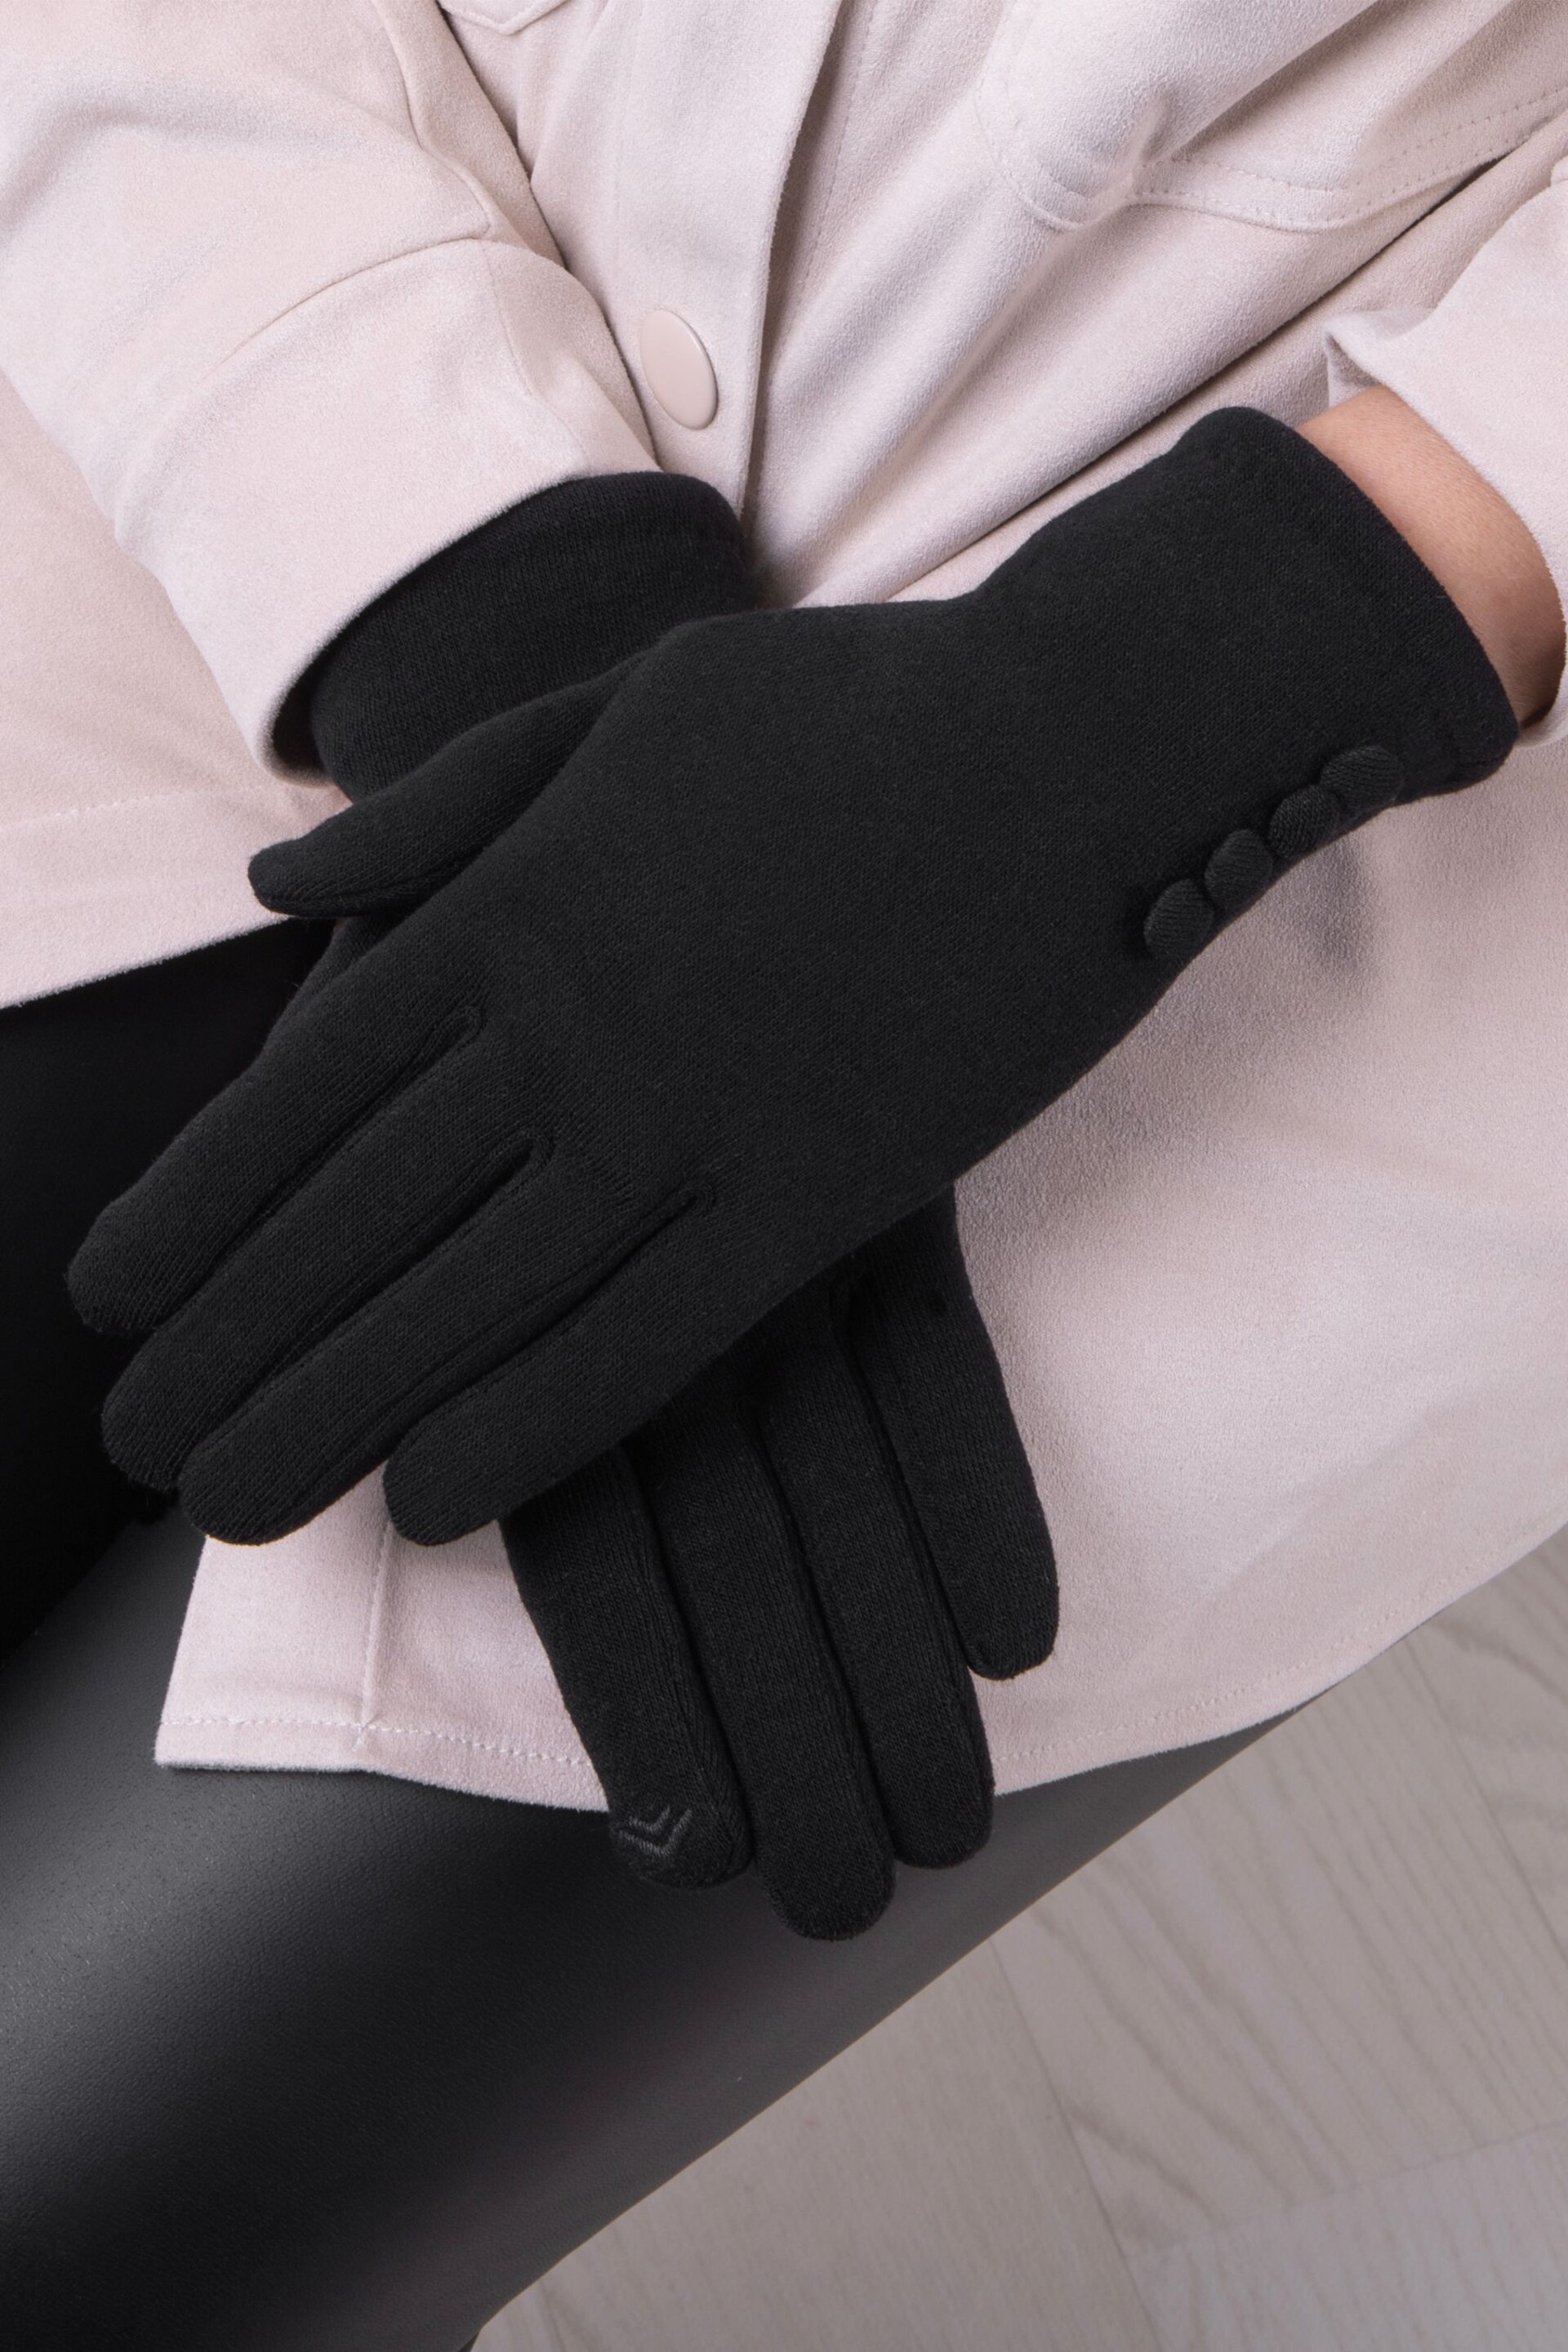 Totes Black Isotoner Ladies Thermal SmarTouch Gloves With Button Detail - Image 2 of 2